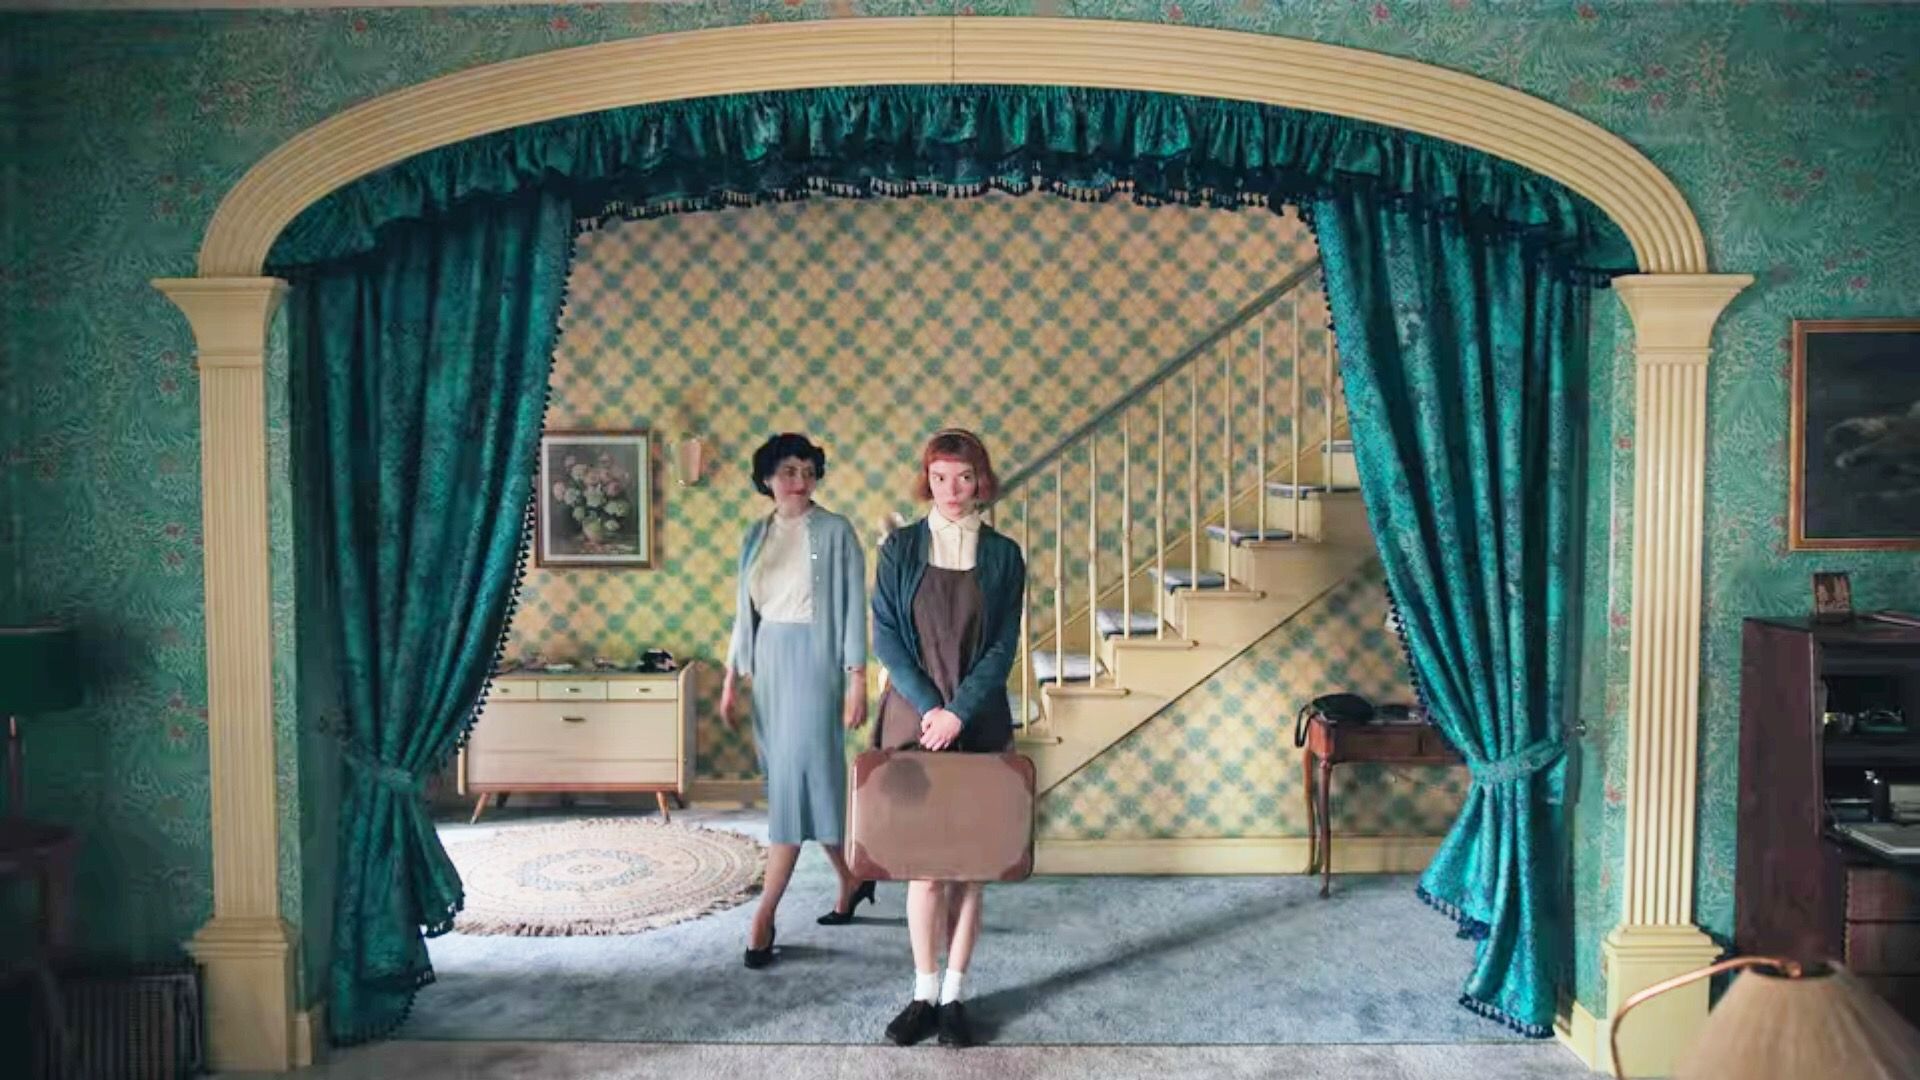 Mrs. Alma Wheatley (Marielle Heller) and Beth Harmon (Anya Taylor-Joy) stand in front of the staircase of the Wheatley home with turquoise floral wallpaper and turquoise satin curtains.